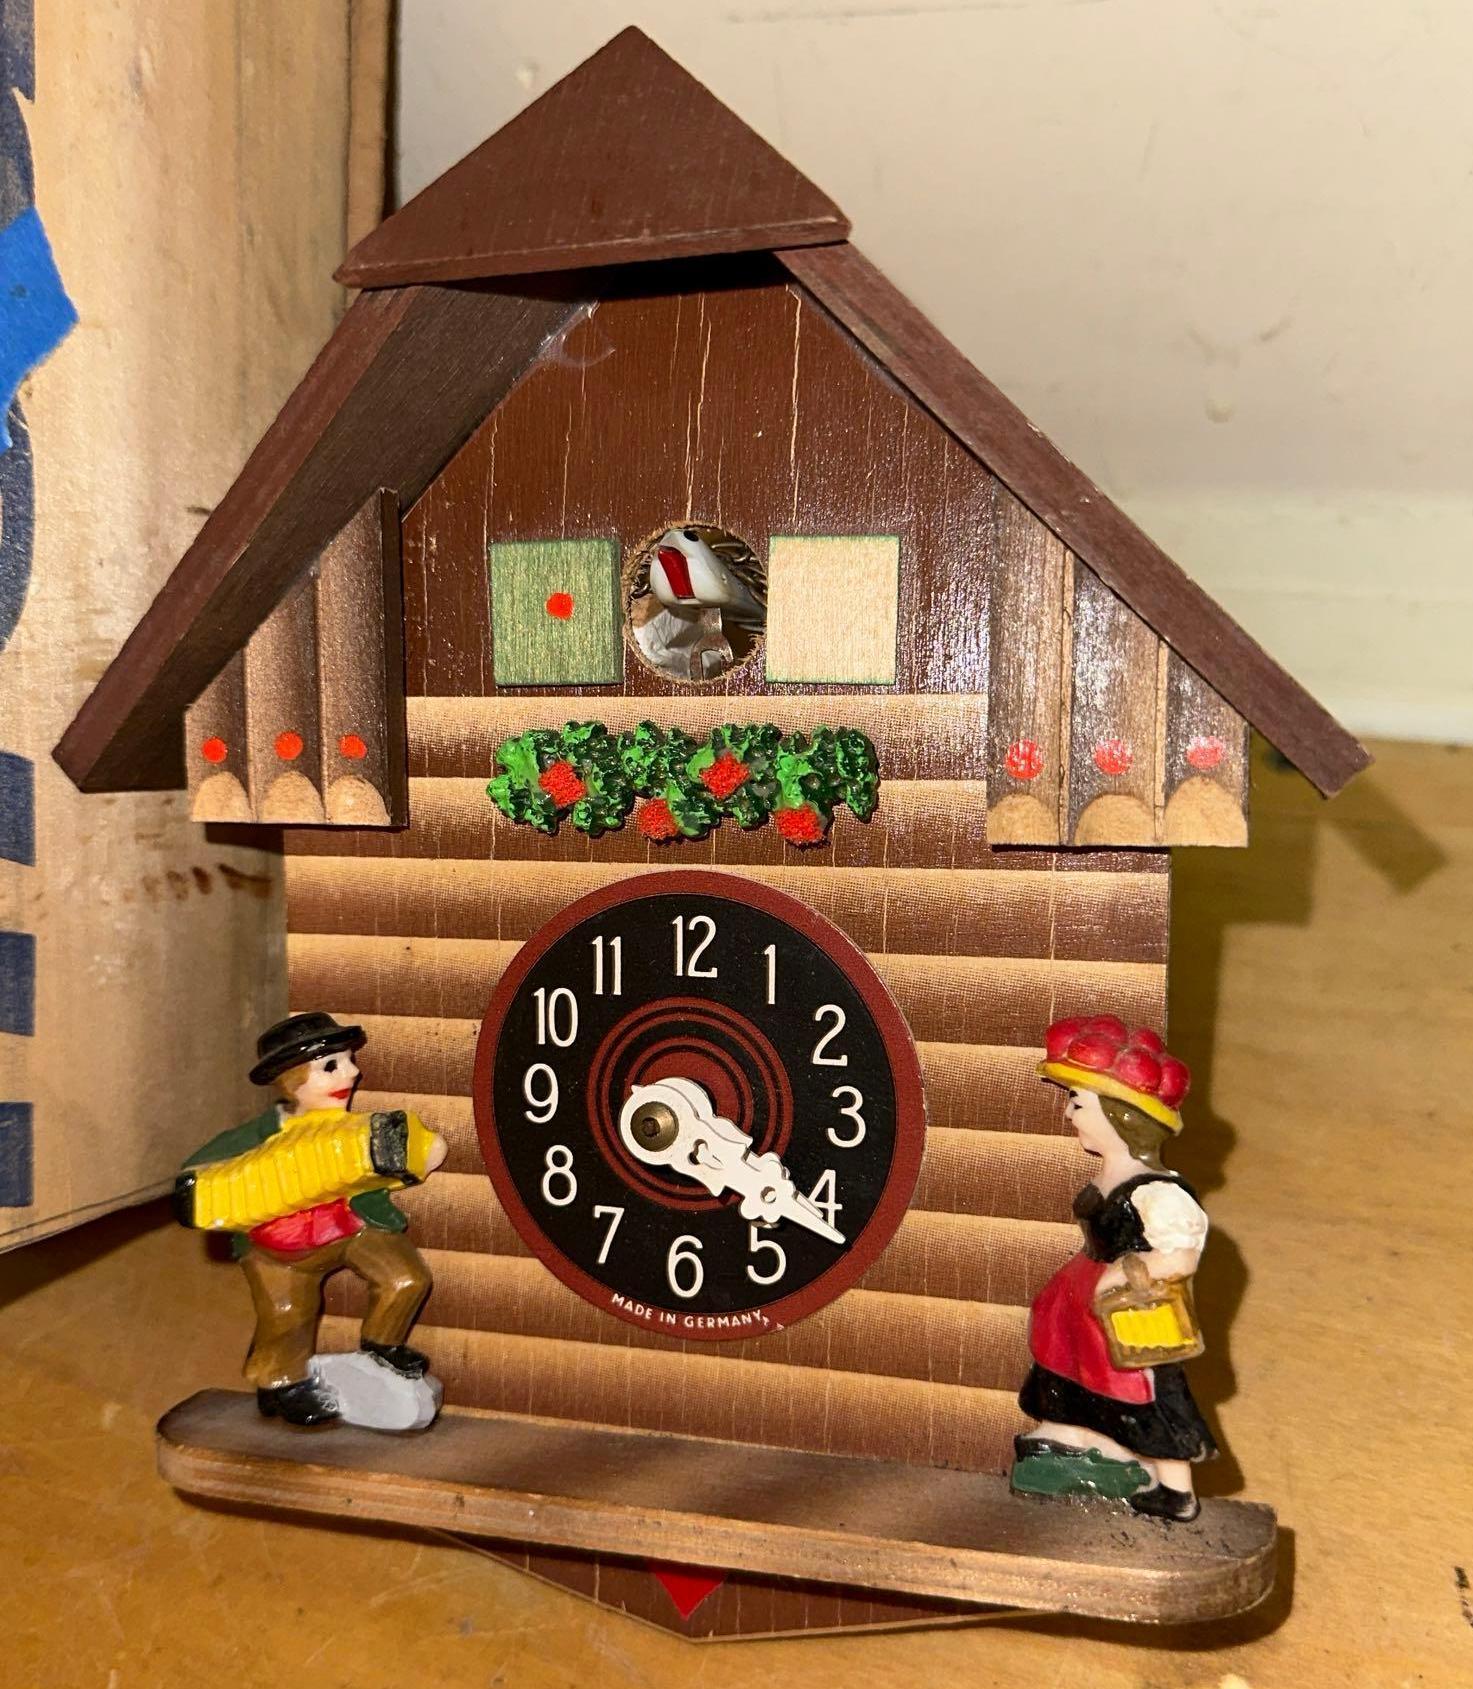 Vintage Cuckoo Clock from Germany and Toy Cuckoo Clock